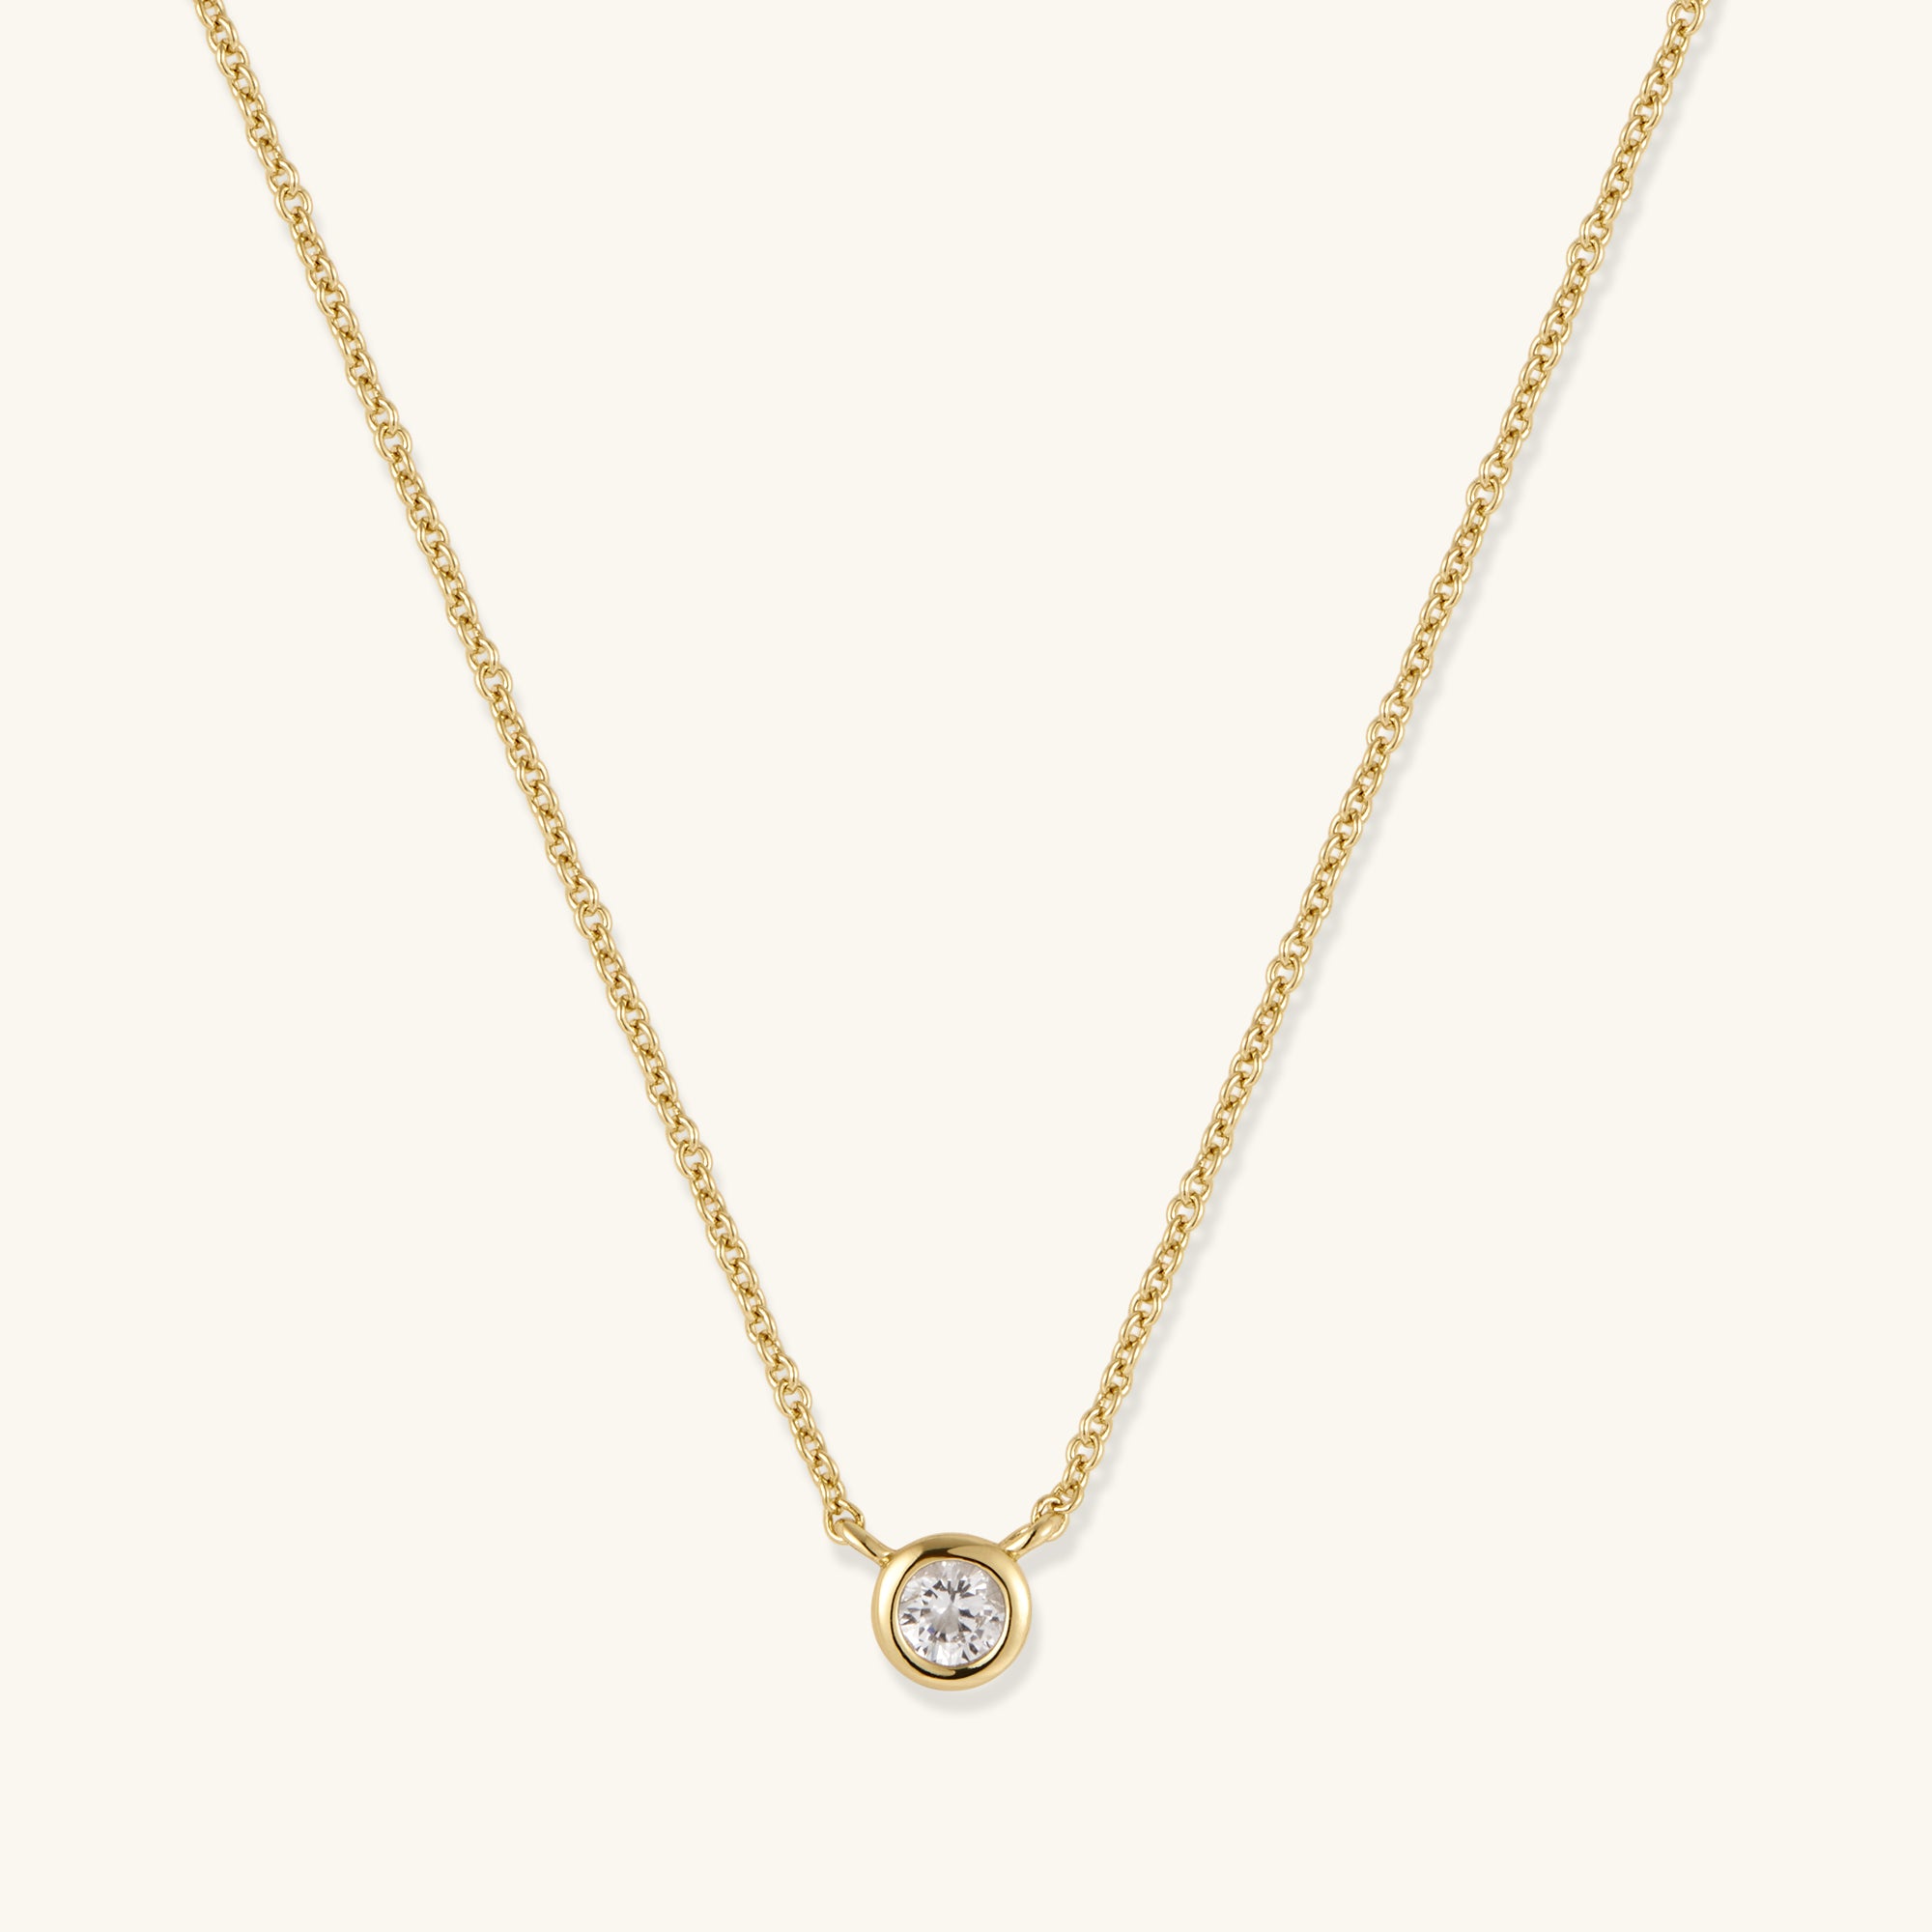 Gold Filled Diamond Bezel Necklace – Heart Made of Gold